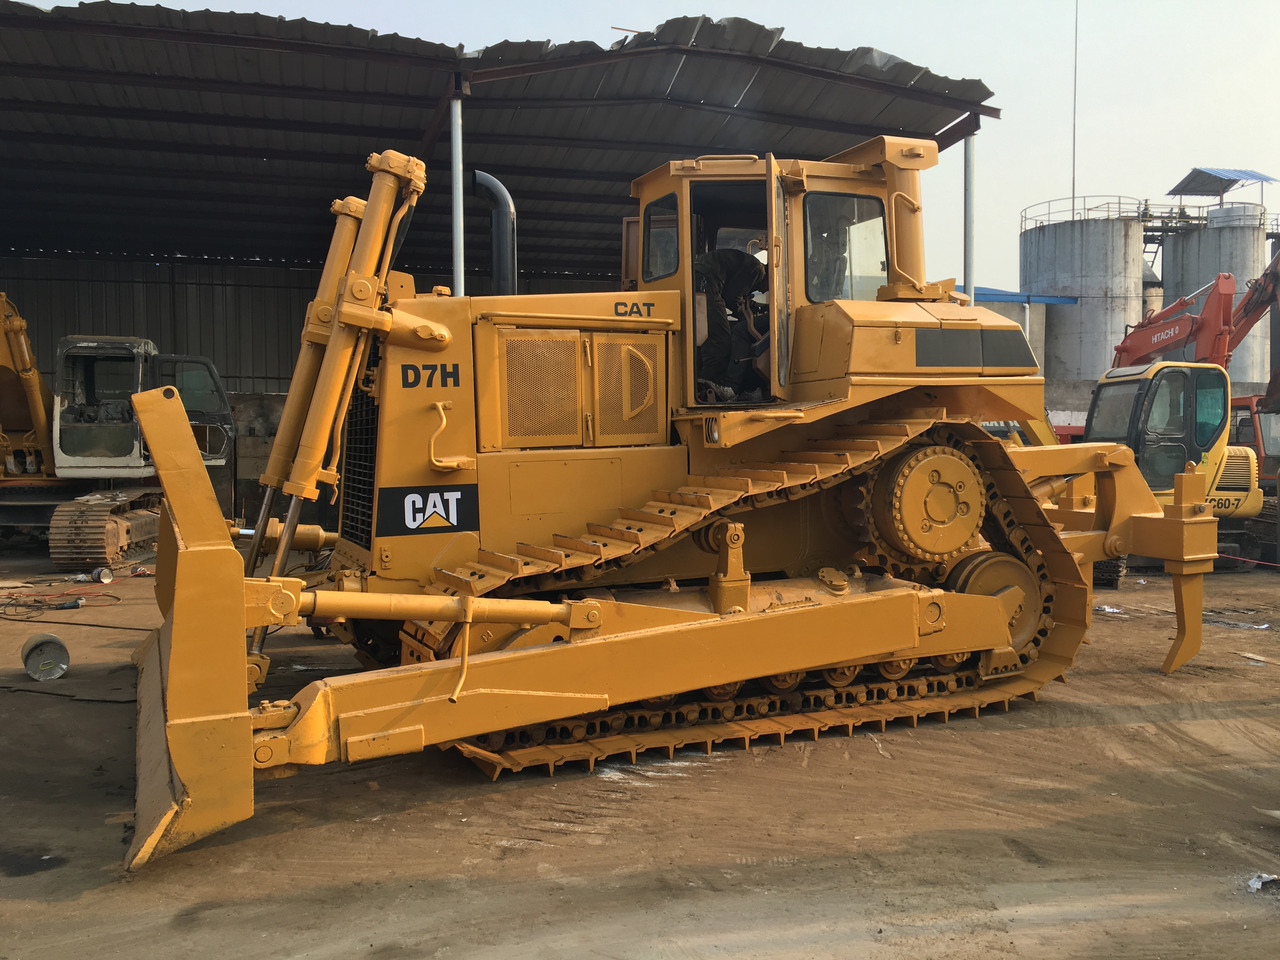 Bulldozer neuf Famous brand CATERPILLAR D7H in good condition on sale: photos 5